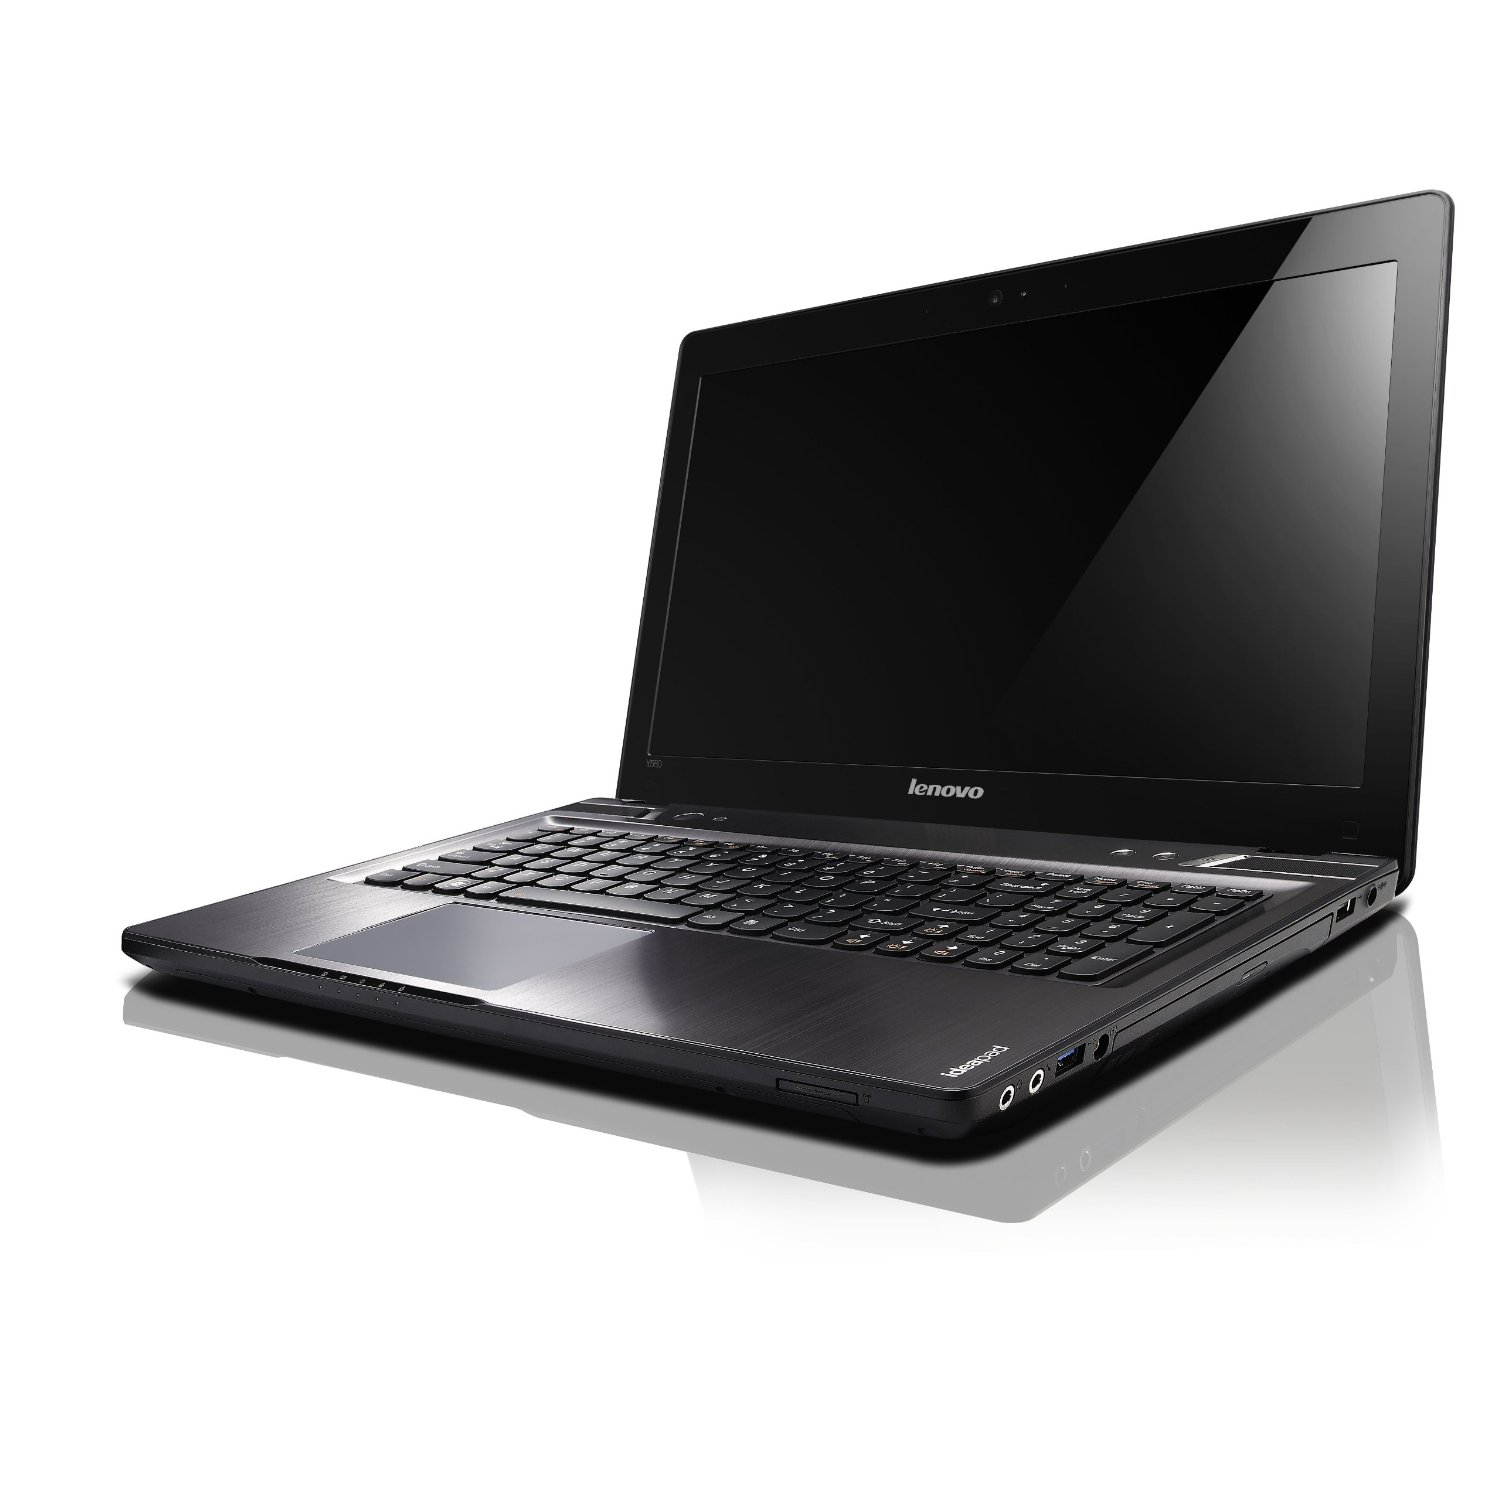 http://thetechjournal.com/wp-content/uploads/images/1209/1346654145-lenovos-bulky-ideapad-y580-156inch-laptop-5.jpg